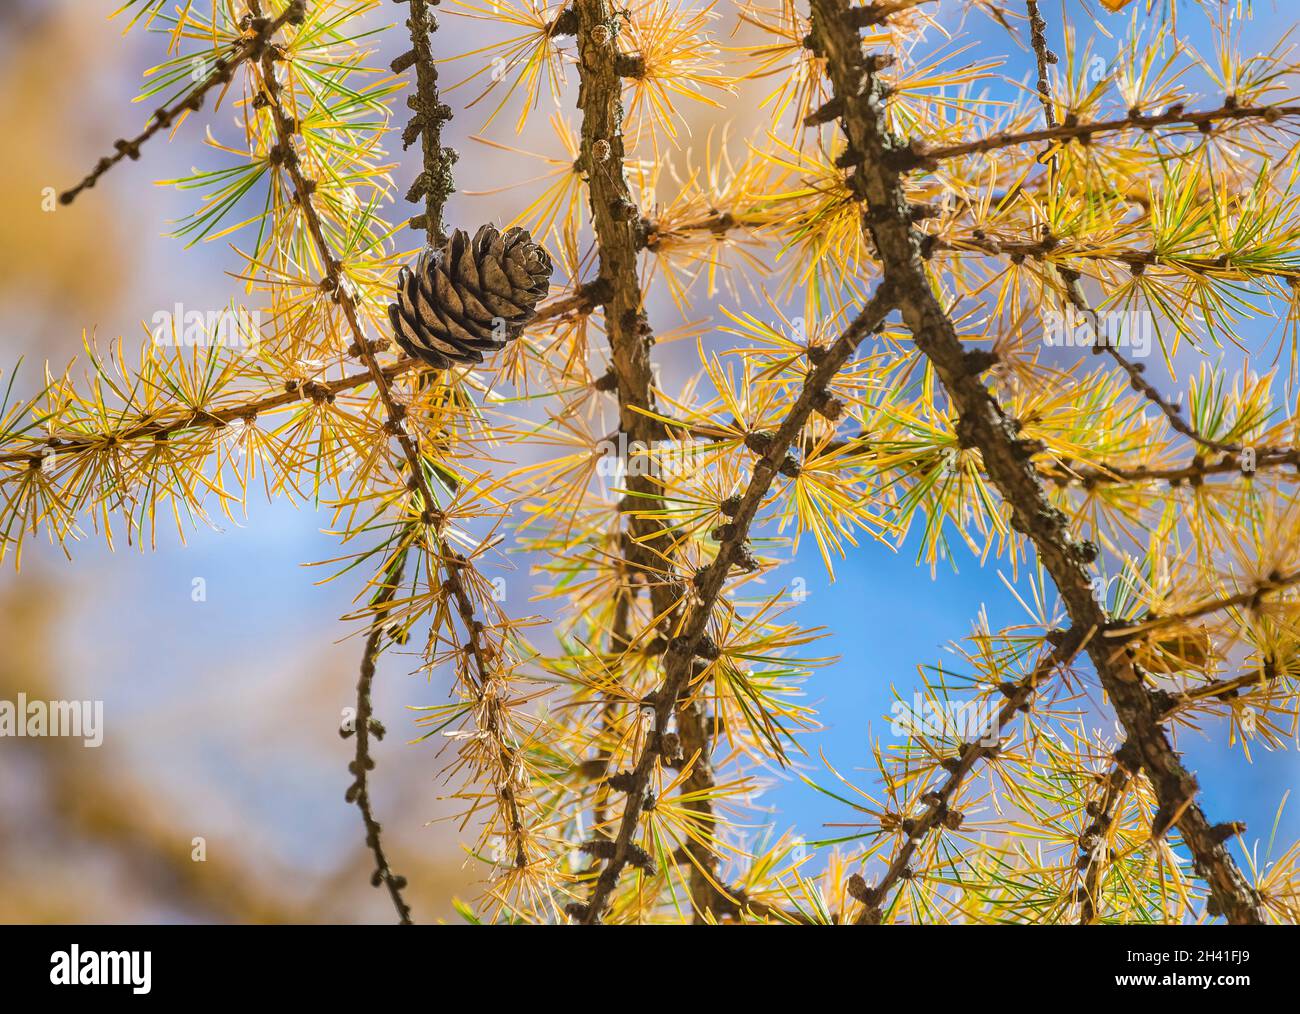 Larix gmelinii or the Dahurian larch. Cones on a coniferous tree in autumn. Yellow needle like leaves. Blue sky background. Stock Photo